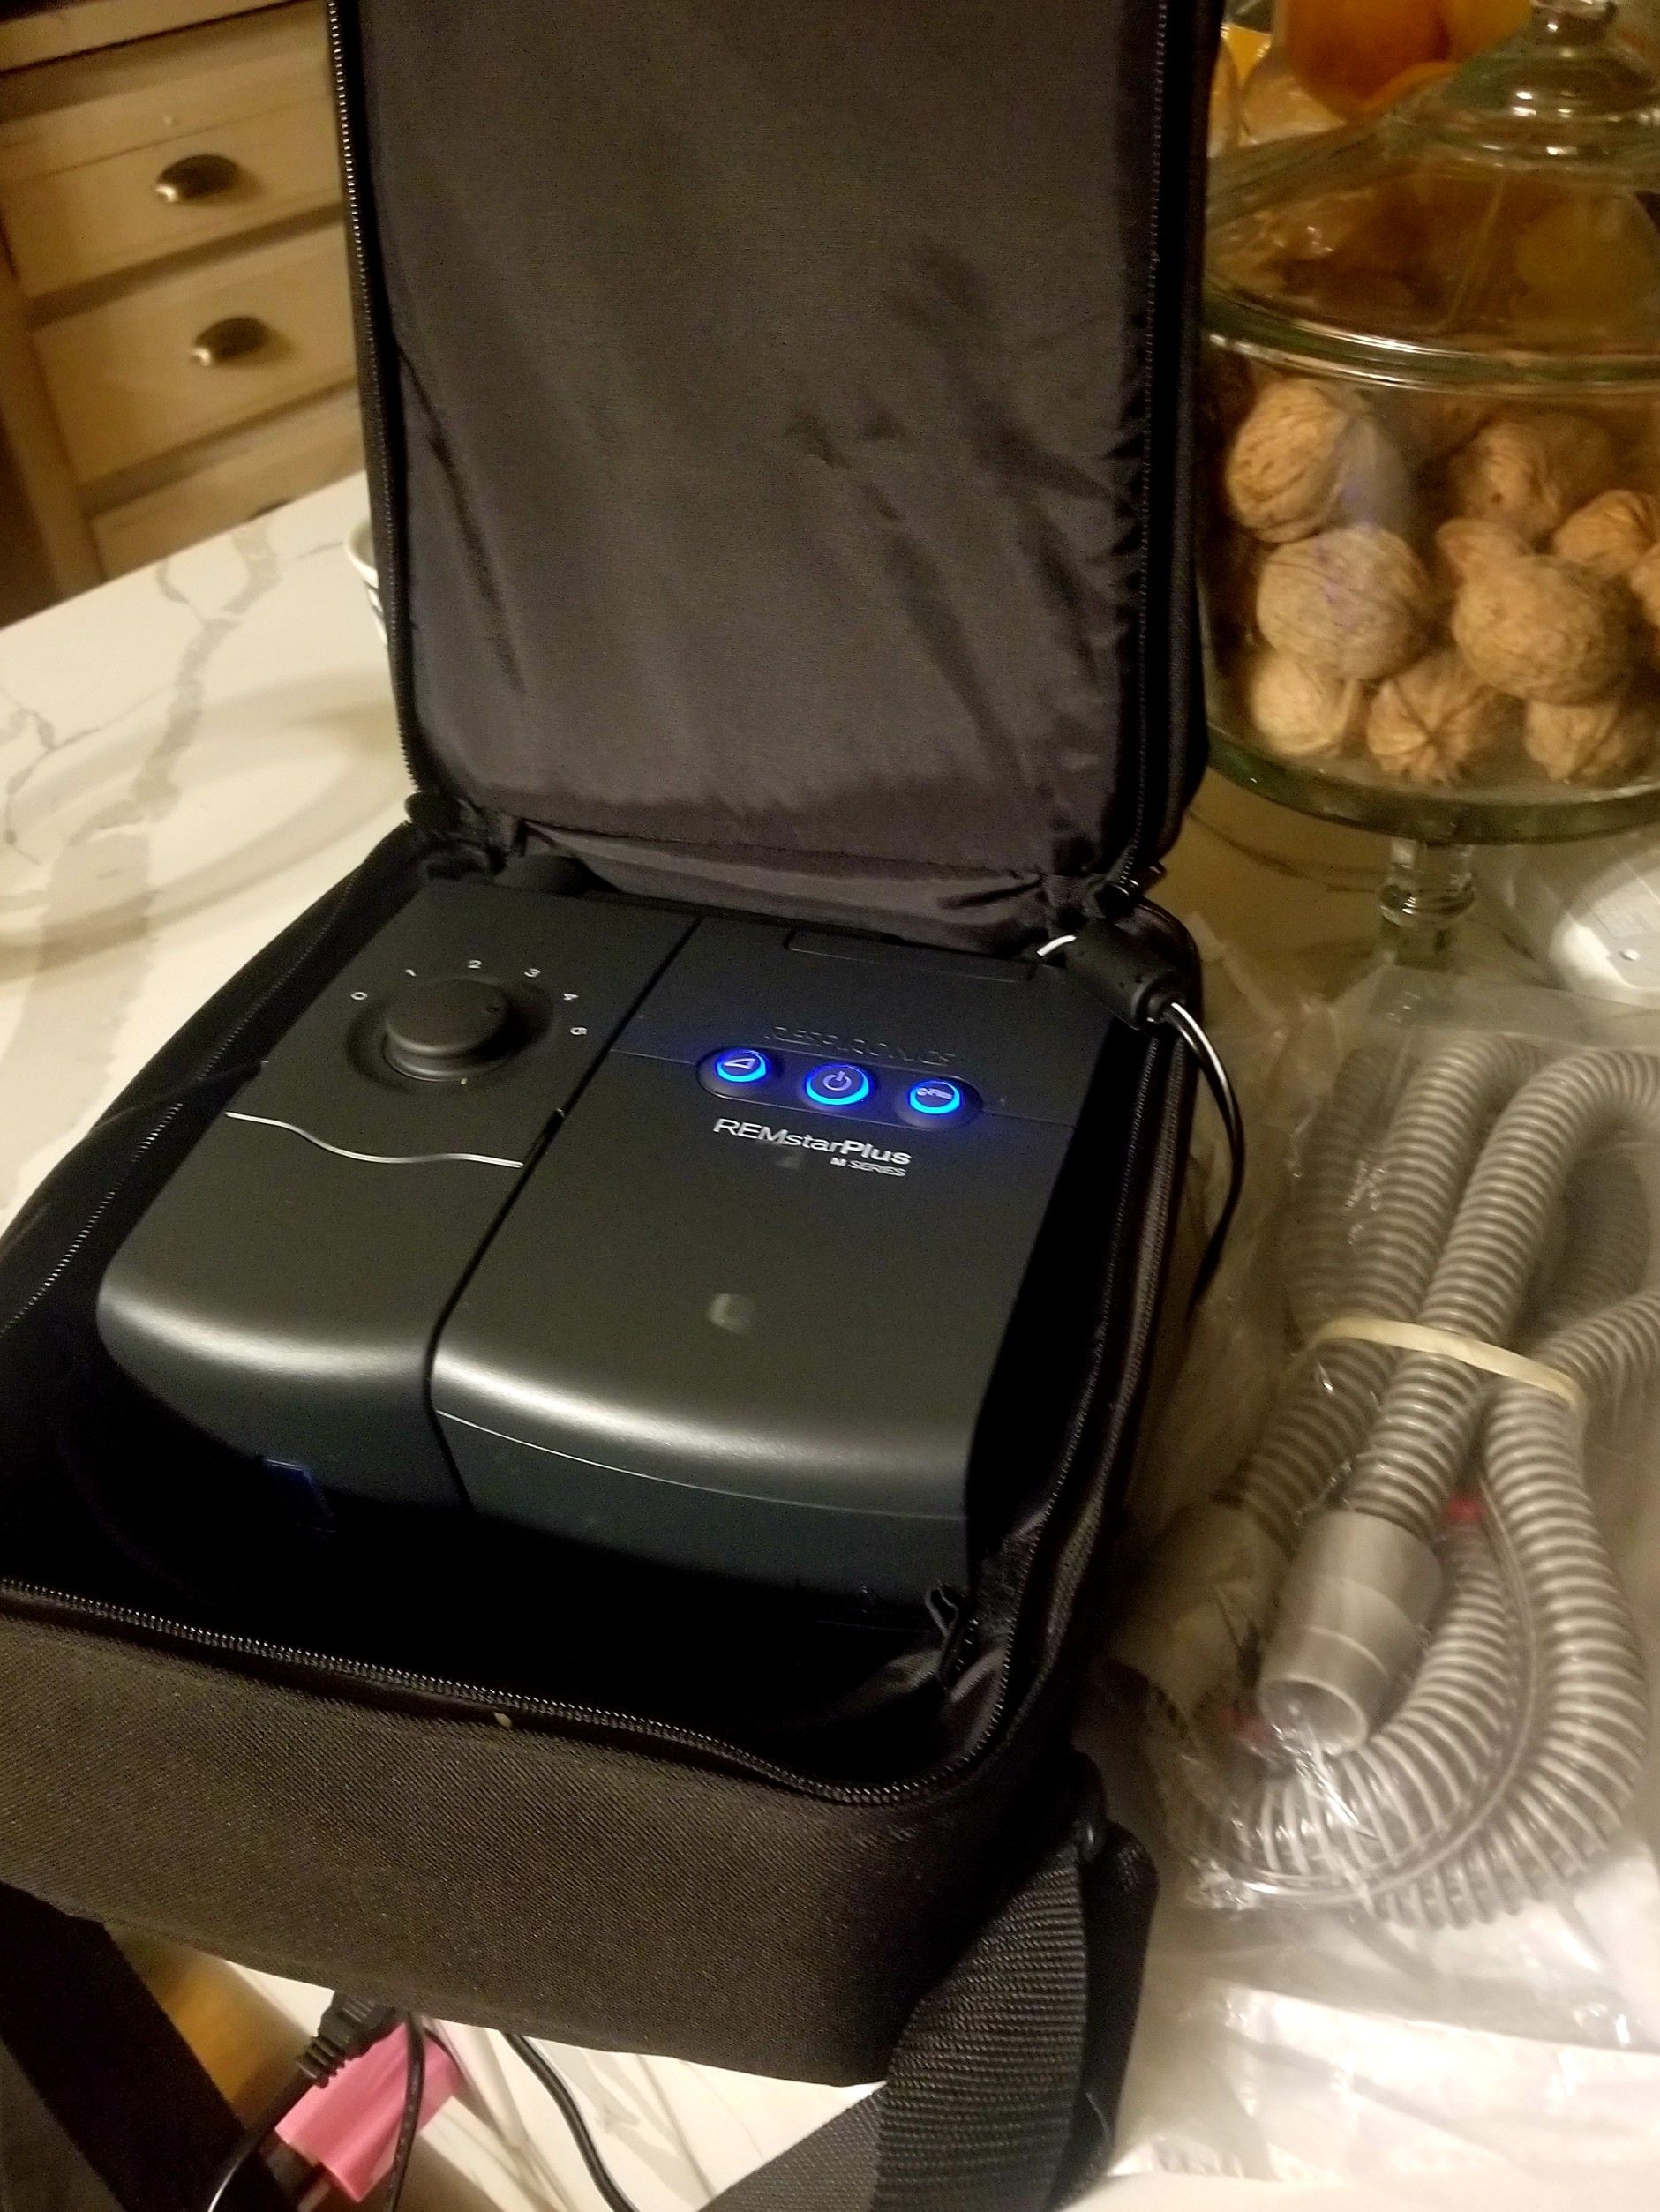 Resperonics Cpap Machine..Great For people with COPD and sleeping disorders..Works Great!